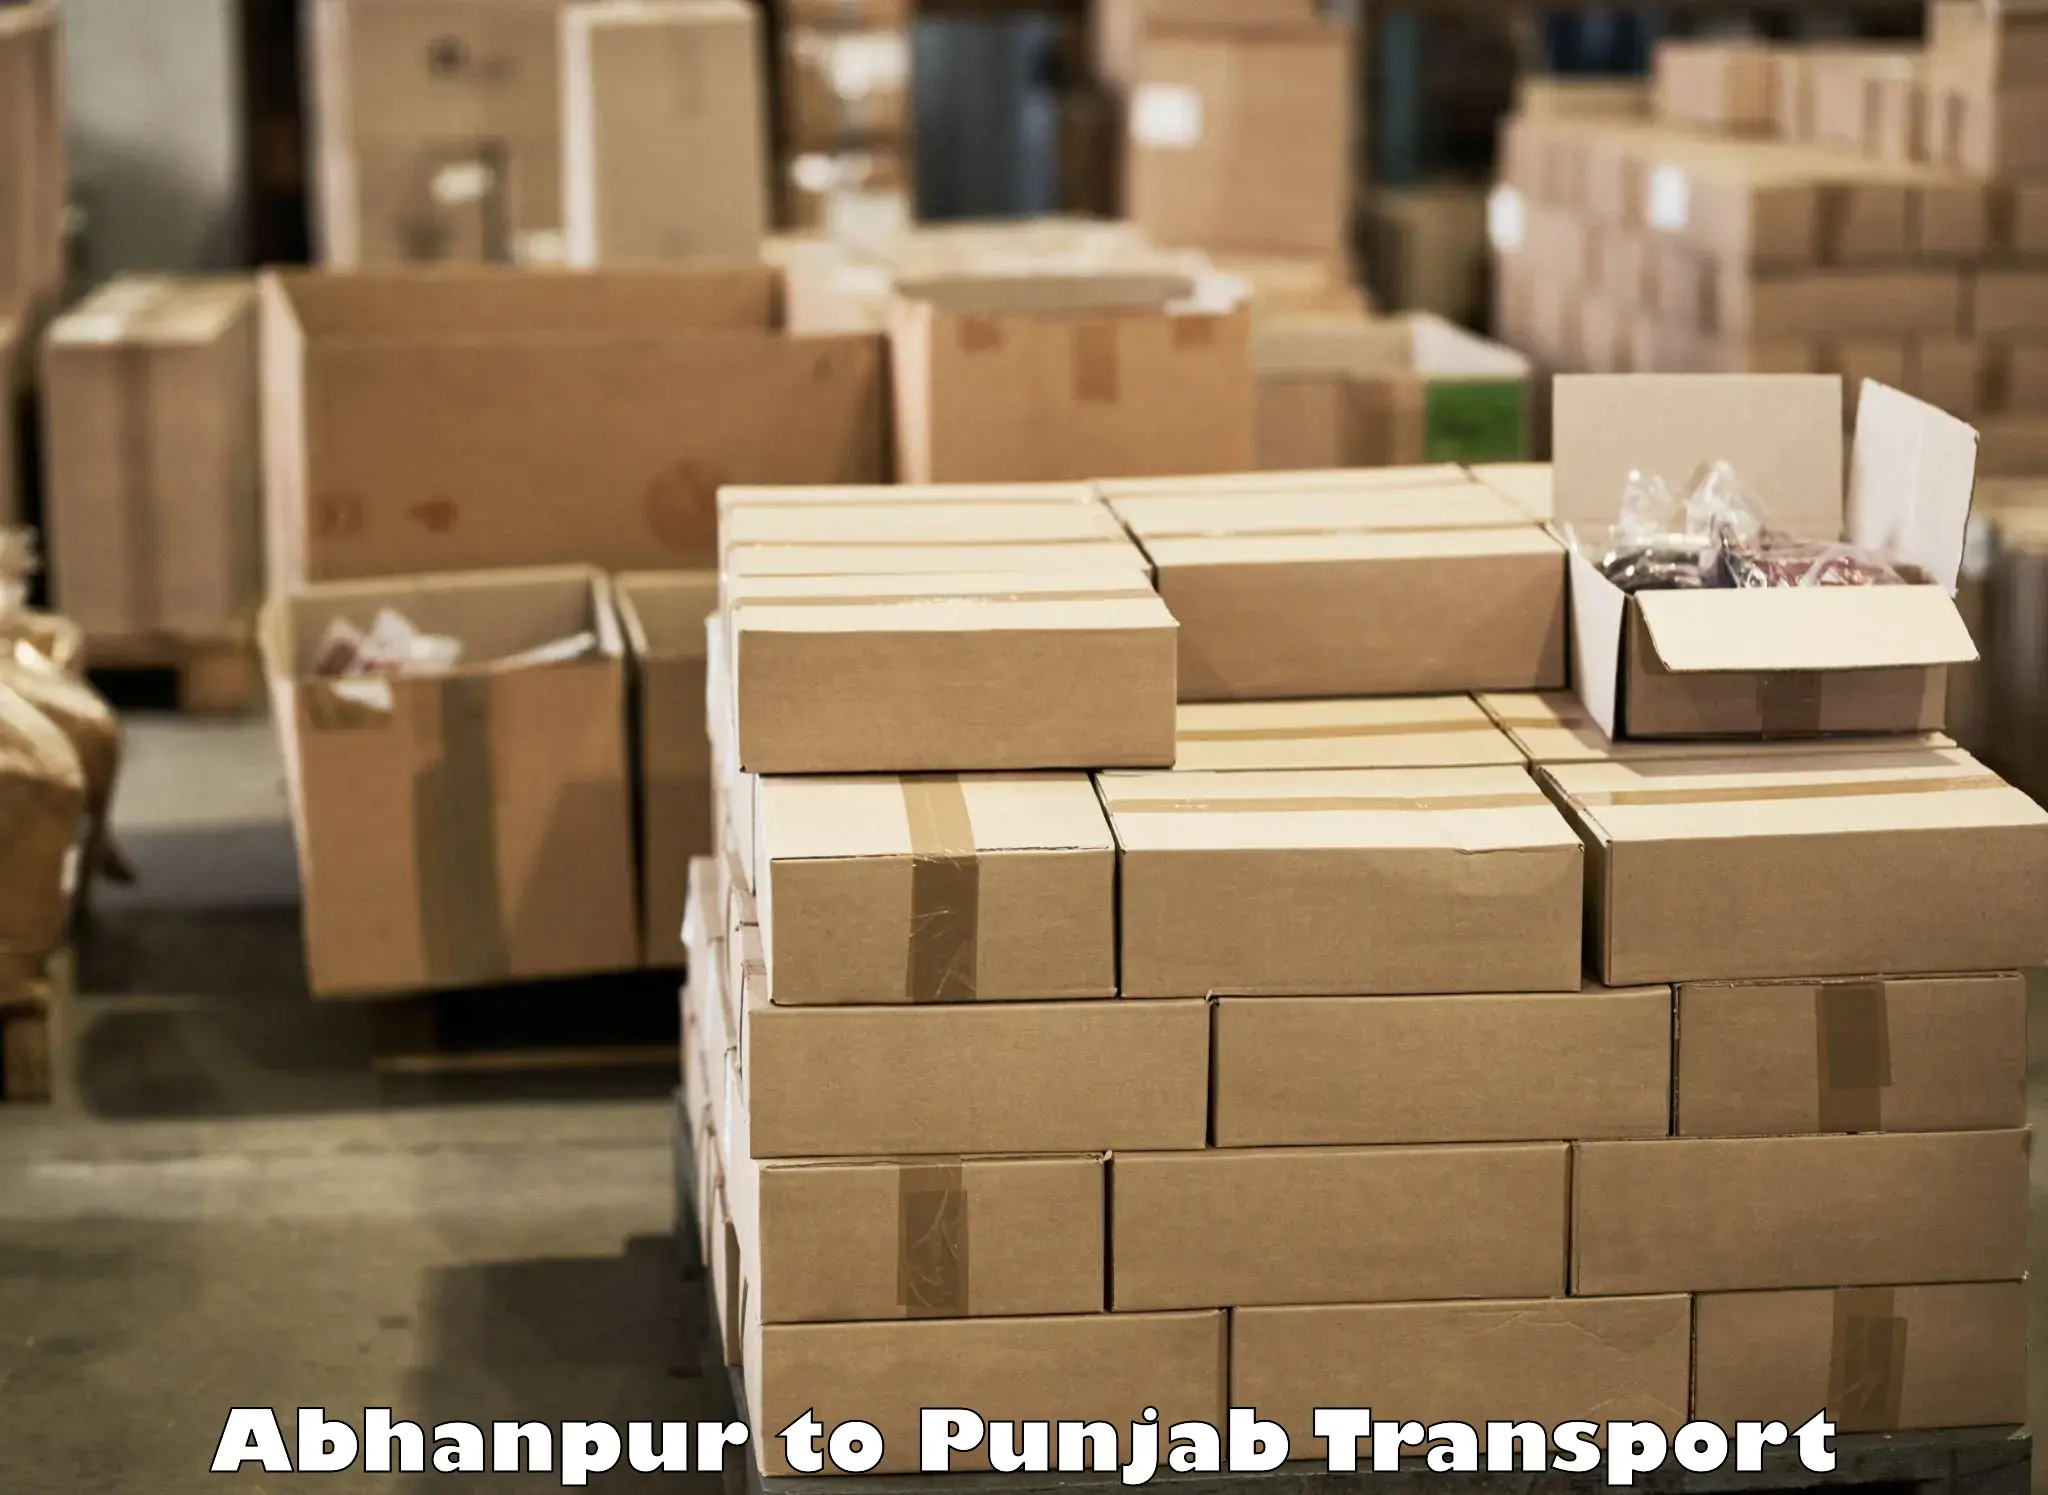 Commercial transport service Abhanpur to Talwara